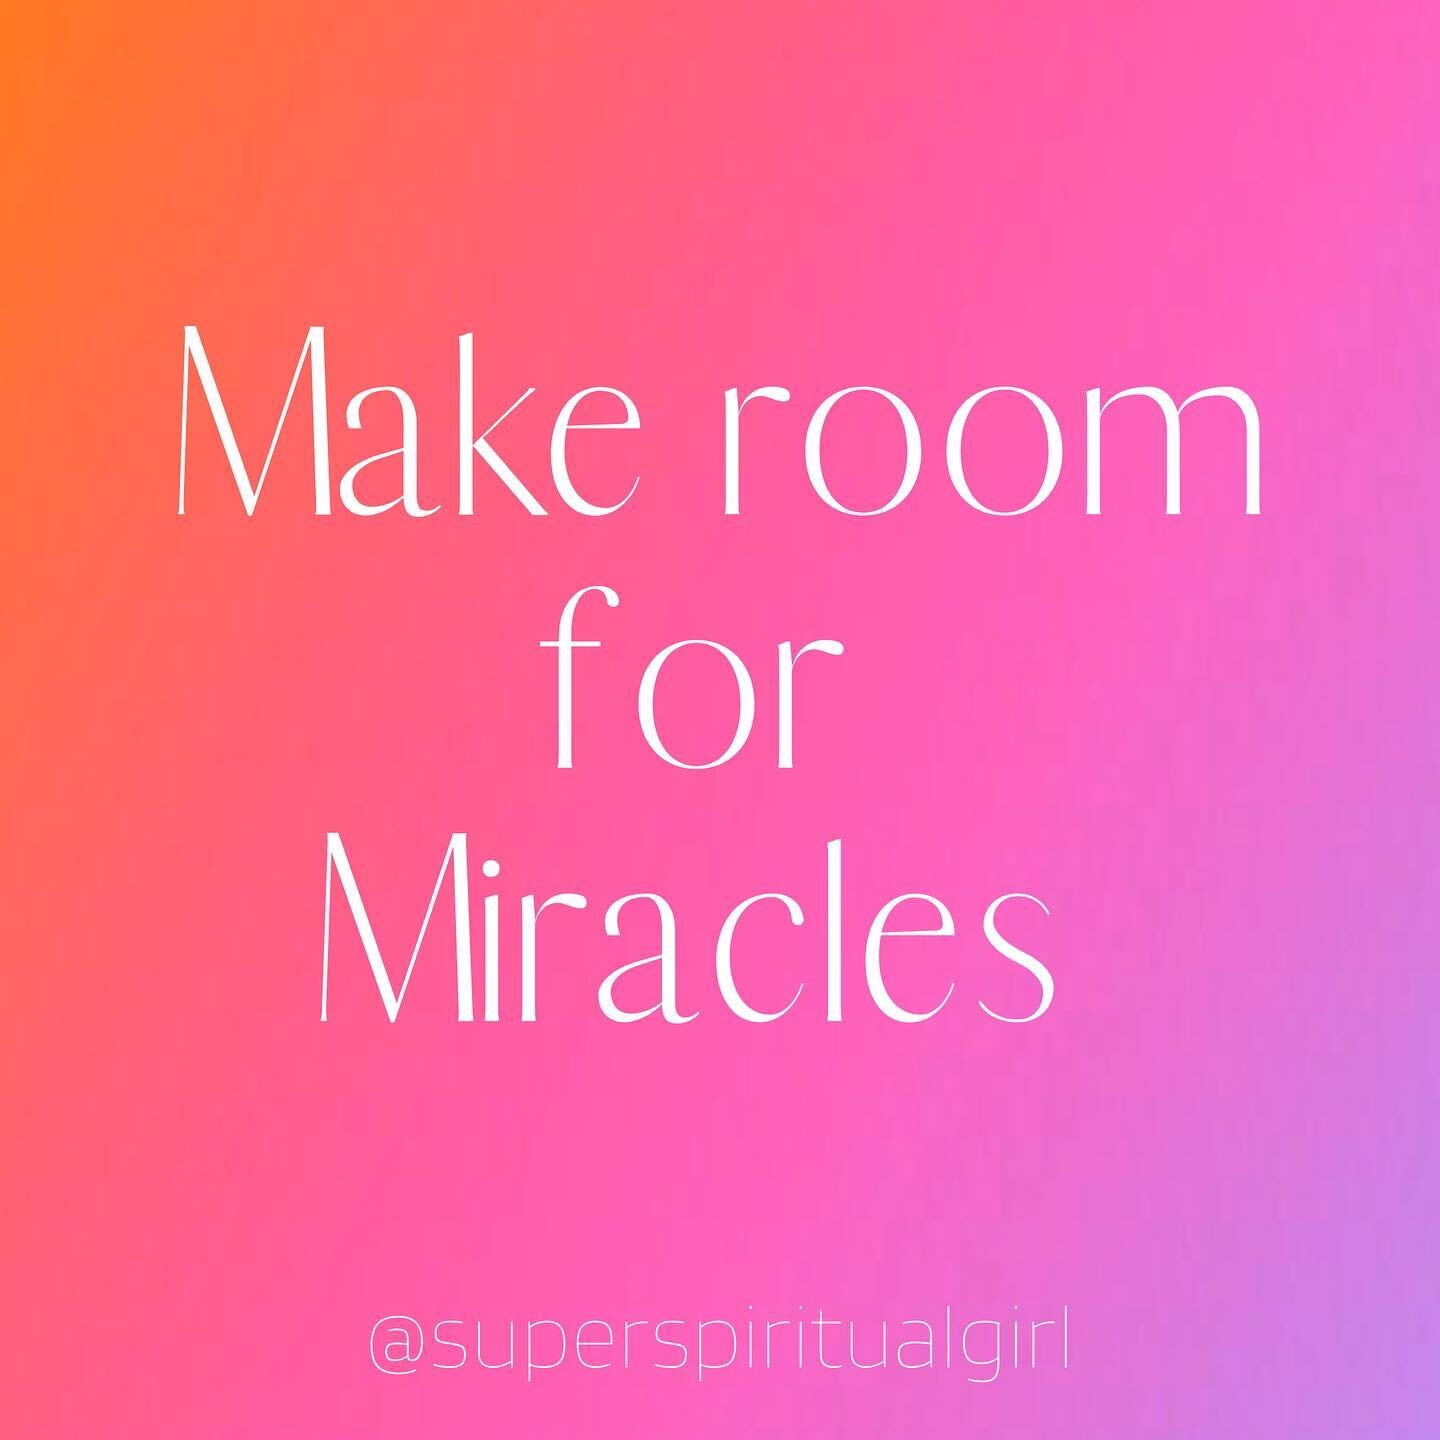 Miracles are all around us&hellip;✨✨✨

And happen every single day ❣️

They range from big to small, and are just as magical either way.

Have you been asking for or desiring miracles in your own life?

If so, I was reminded of this guidance in a cli